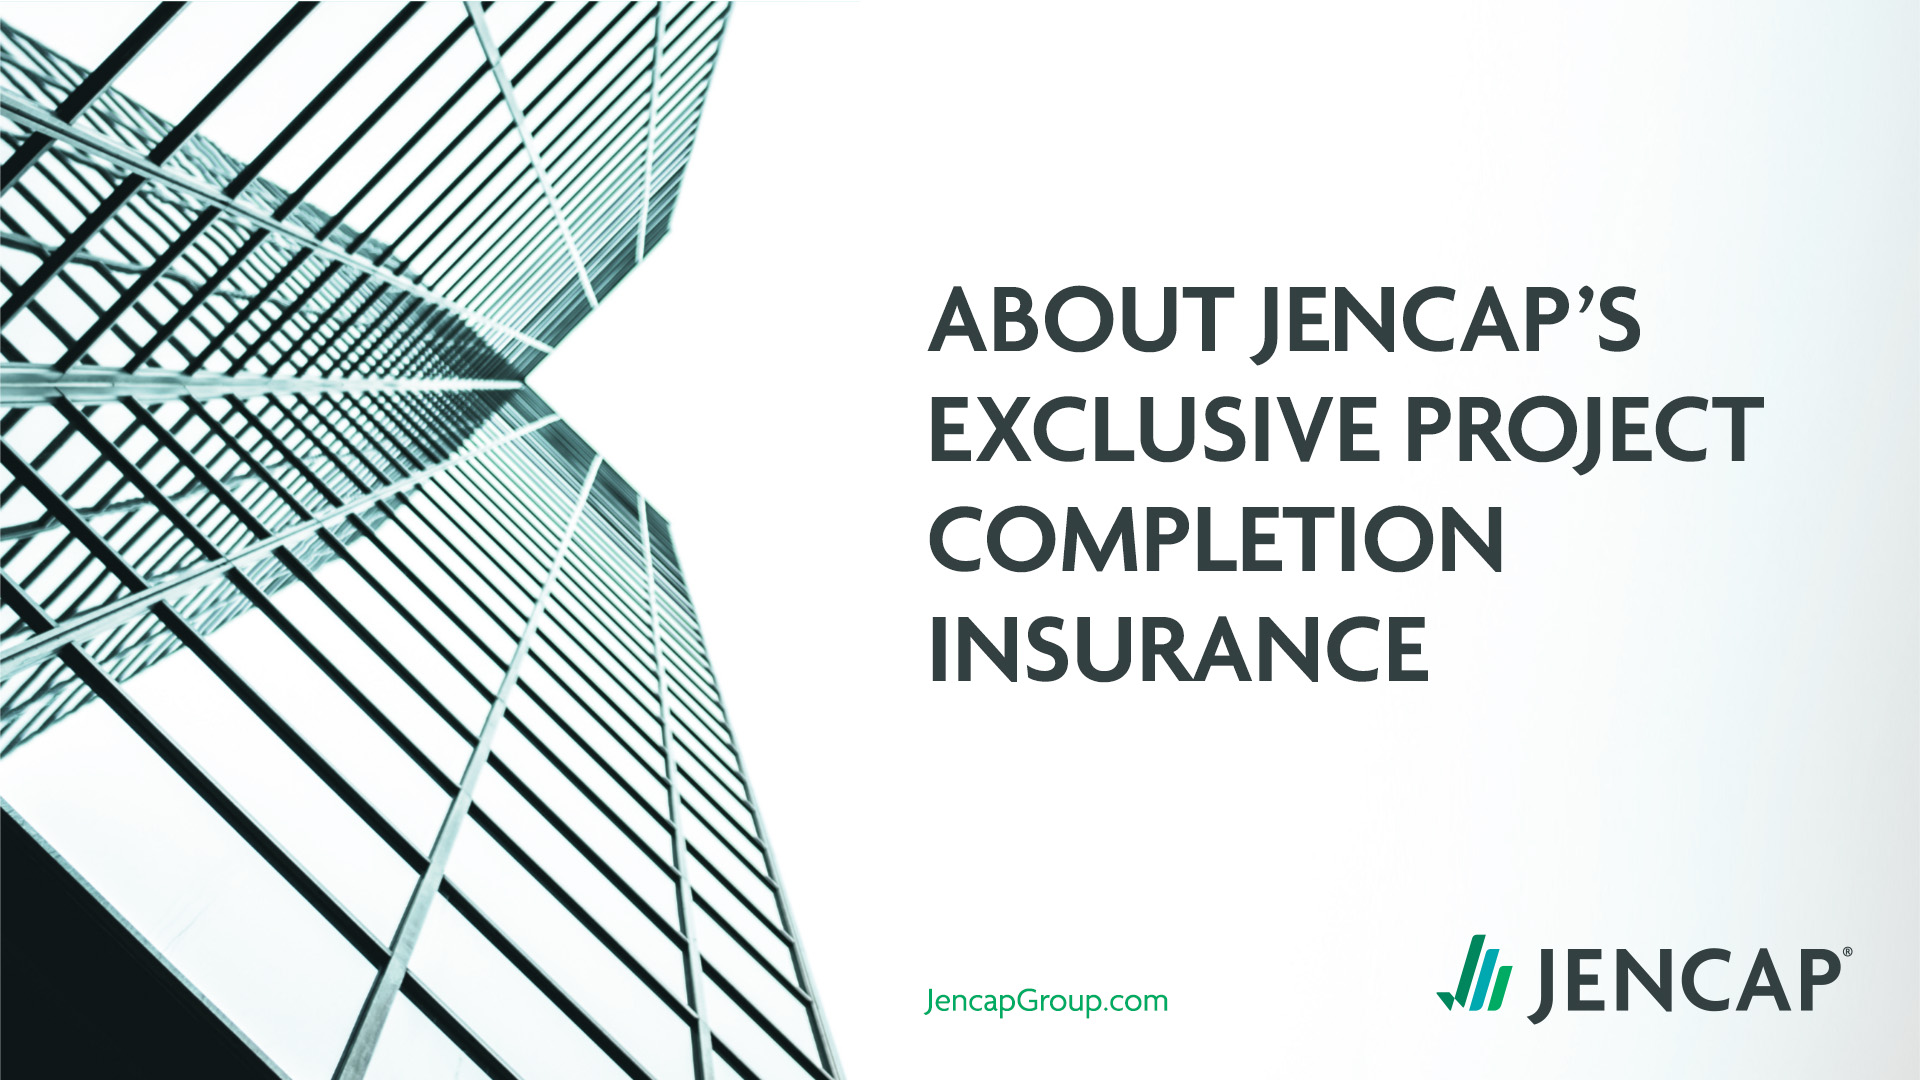 About Jencap's Exclusive Project Completion Insurance Product